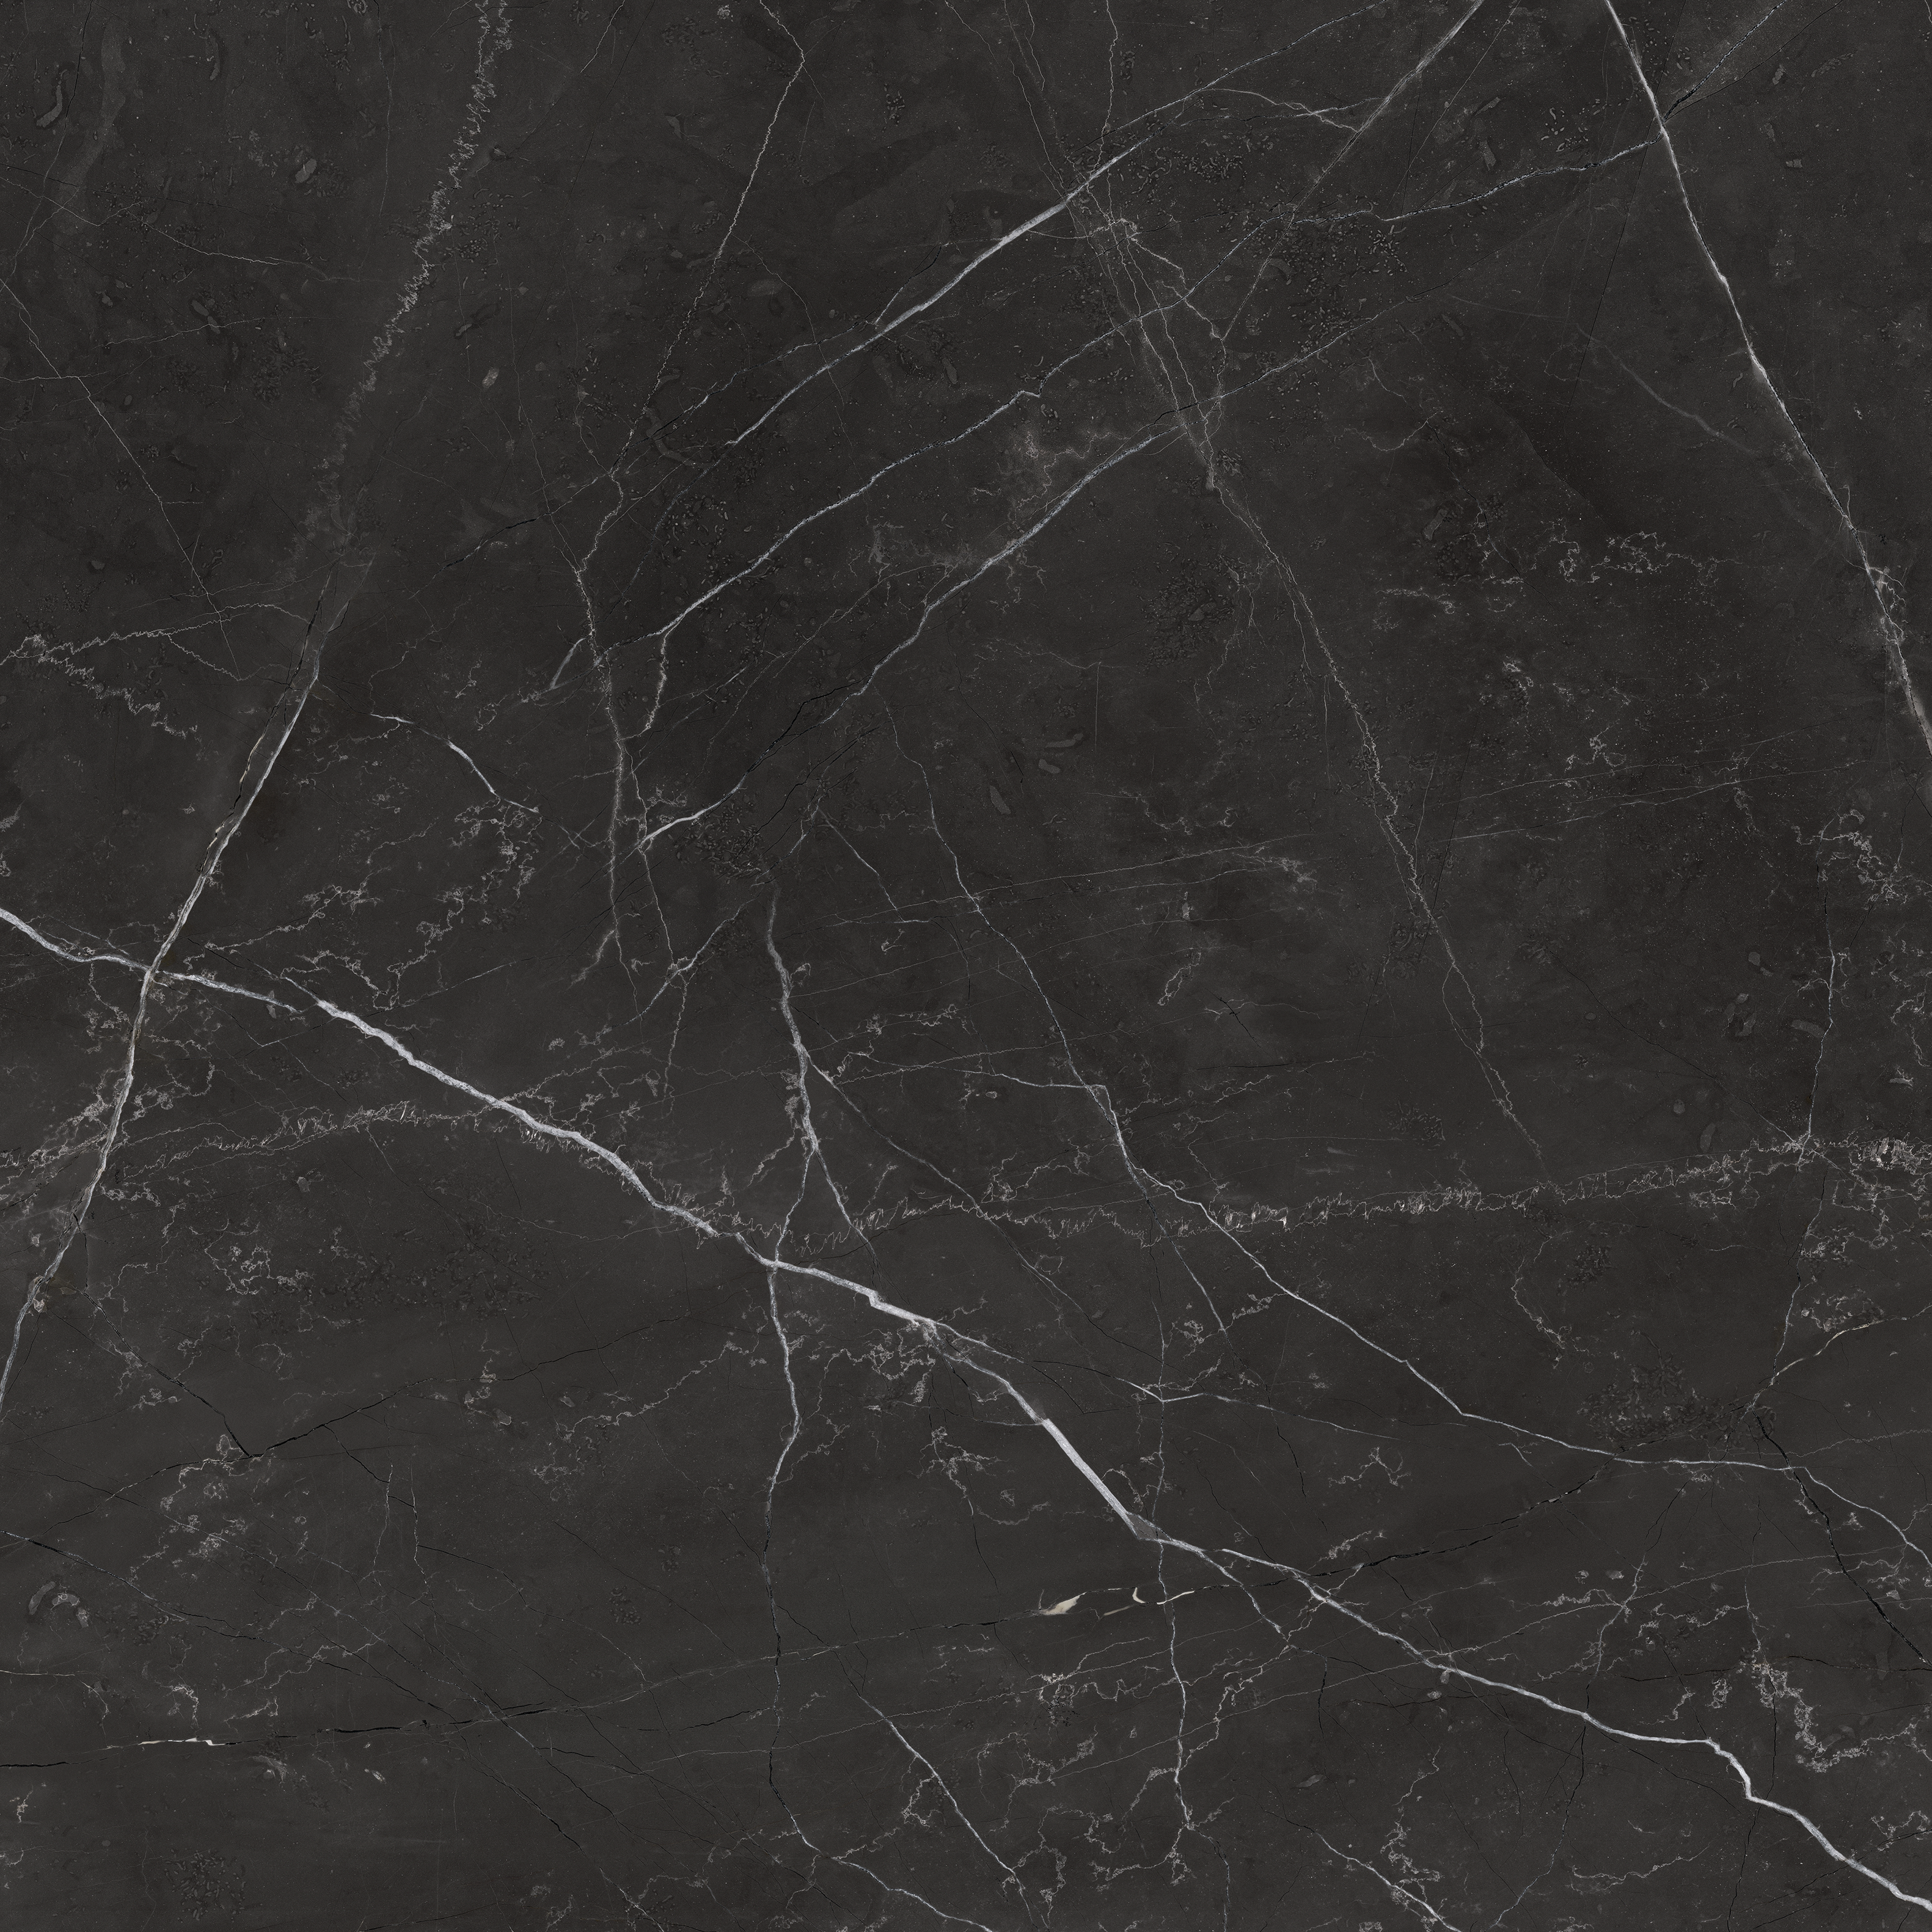 nero venato pattern glazed porcelain field tile from la marca anatolia collection distributed by surface group international polished finish rectified edge 24x24 square shape